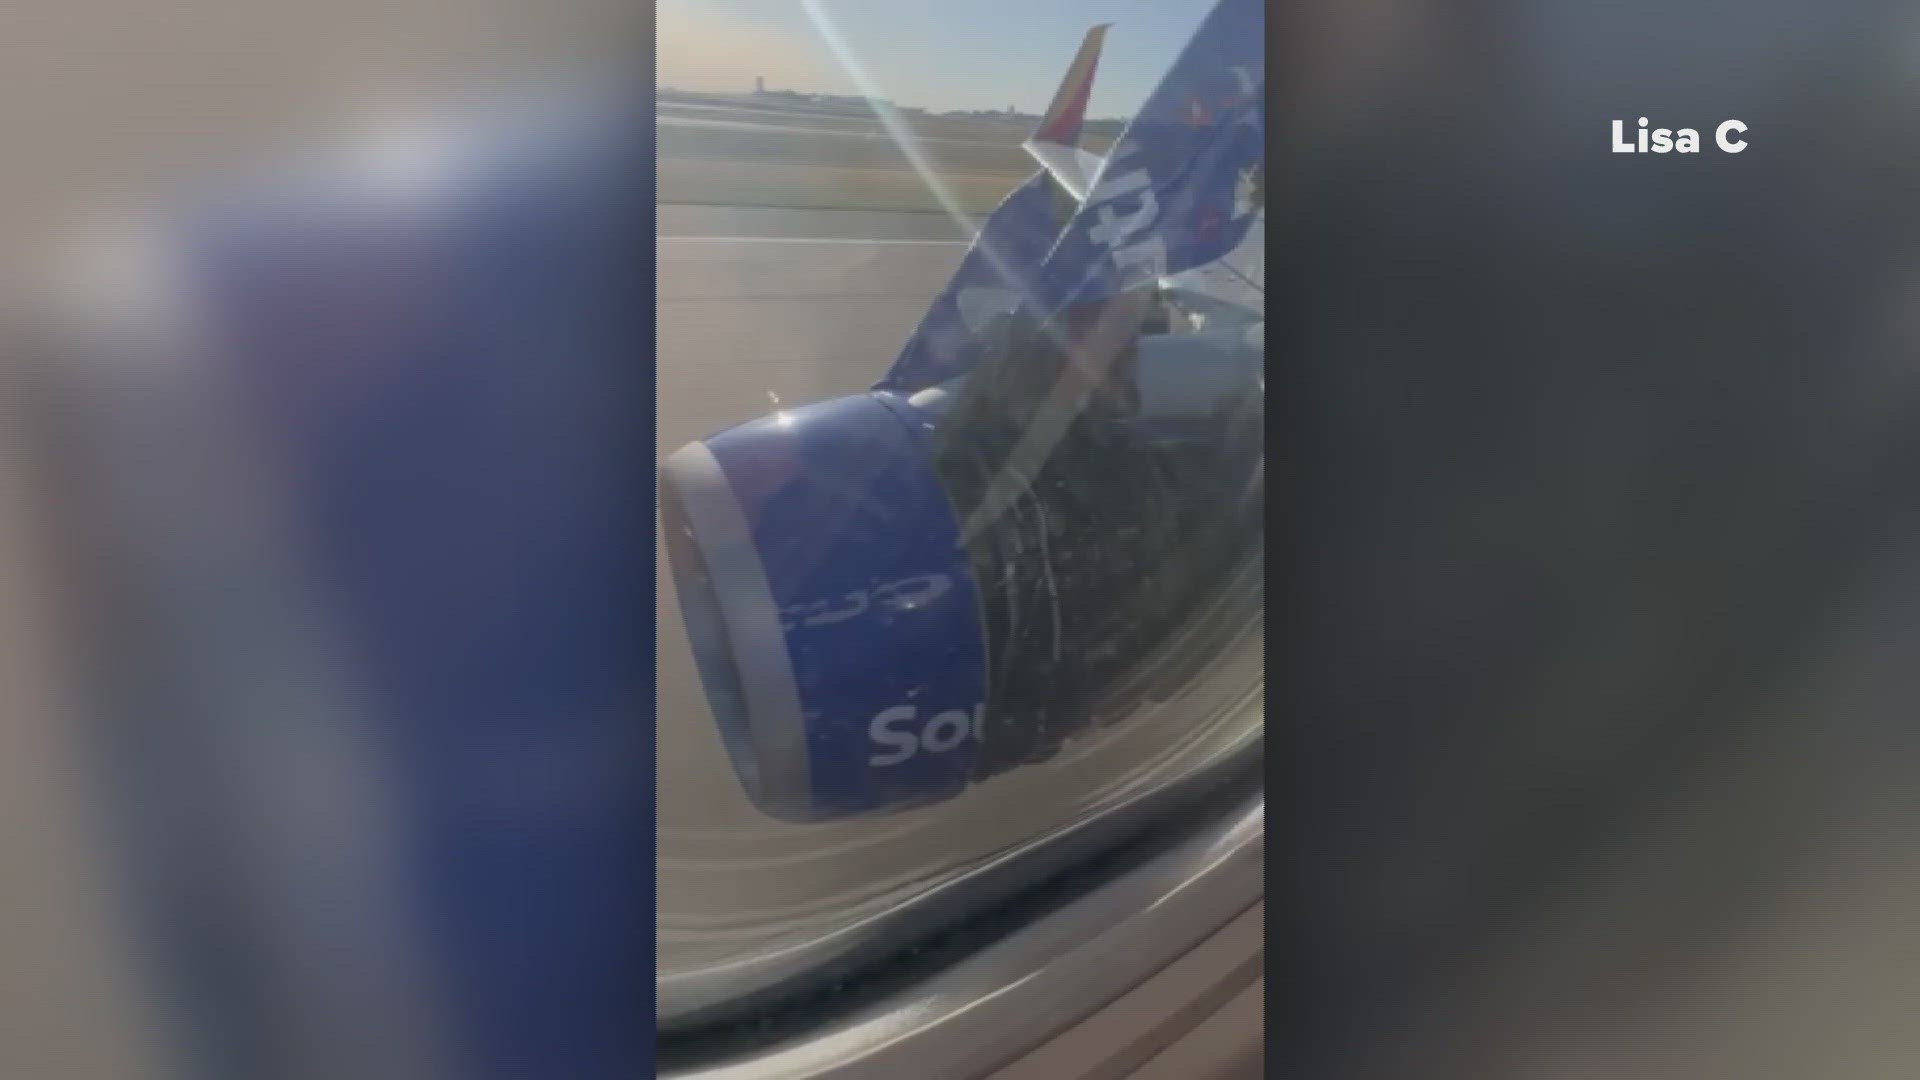 Video posted of the incident appears to show damage to an engine on the plane's wing.